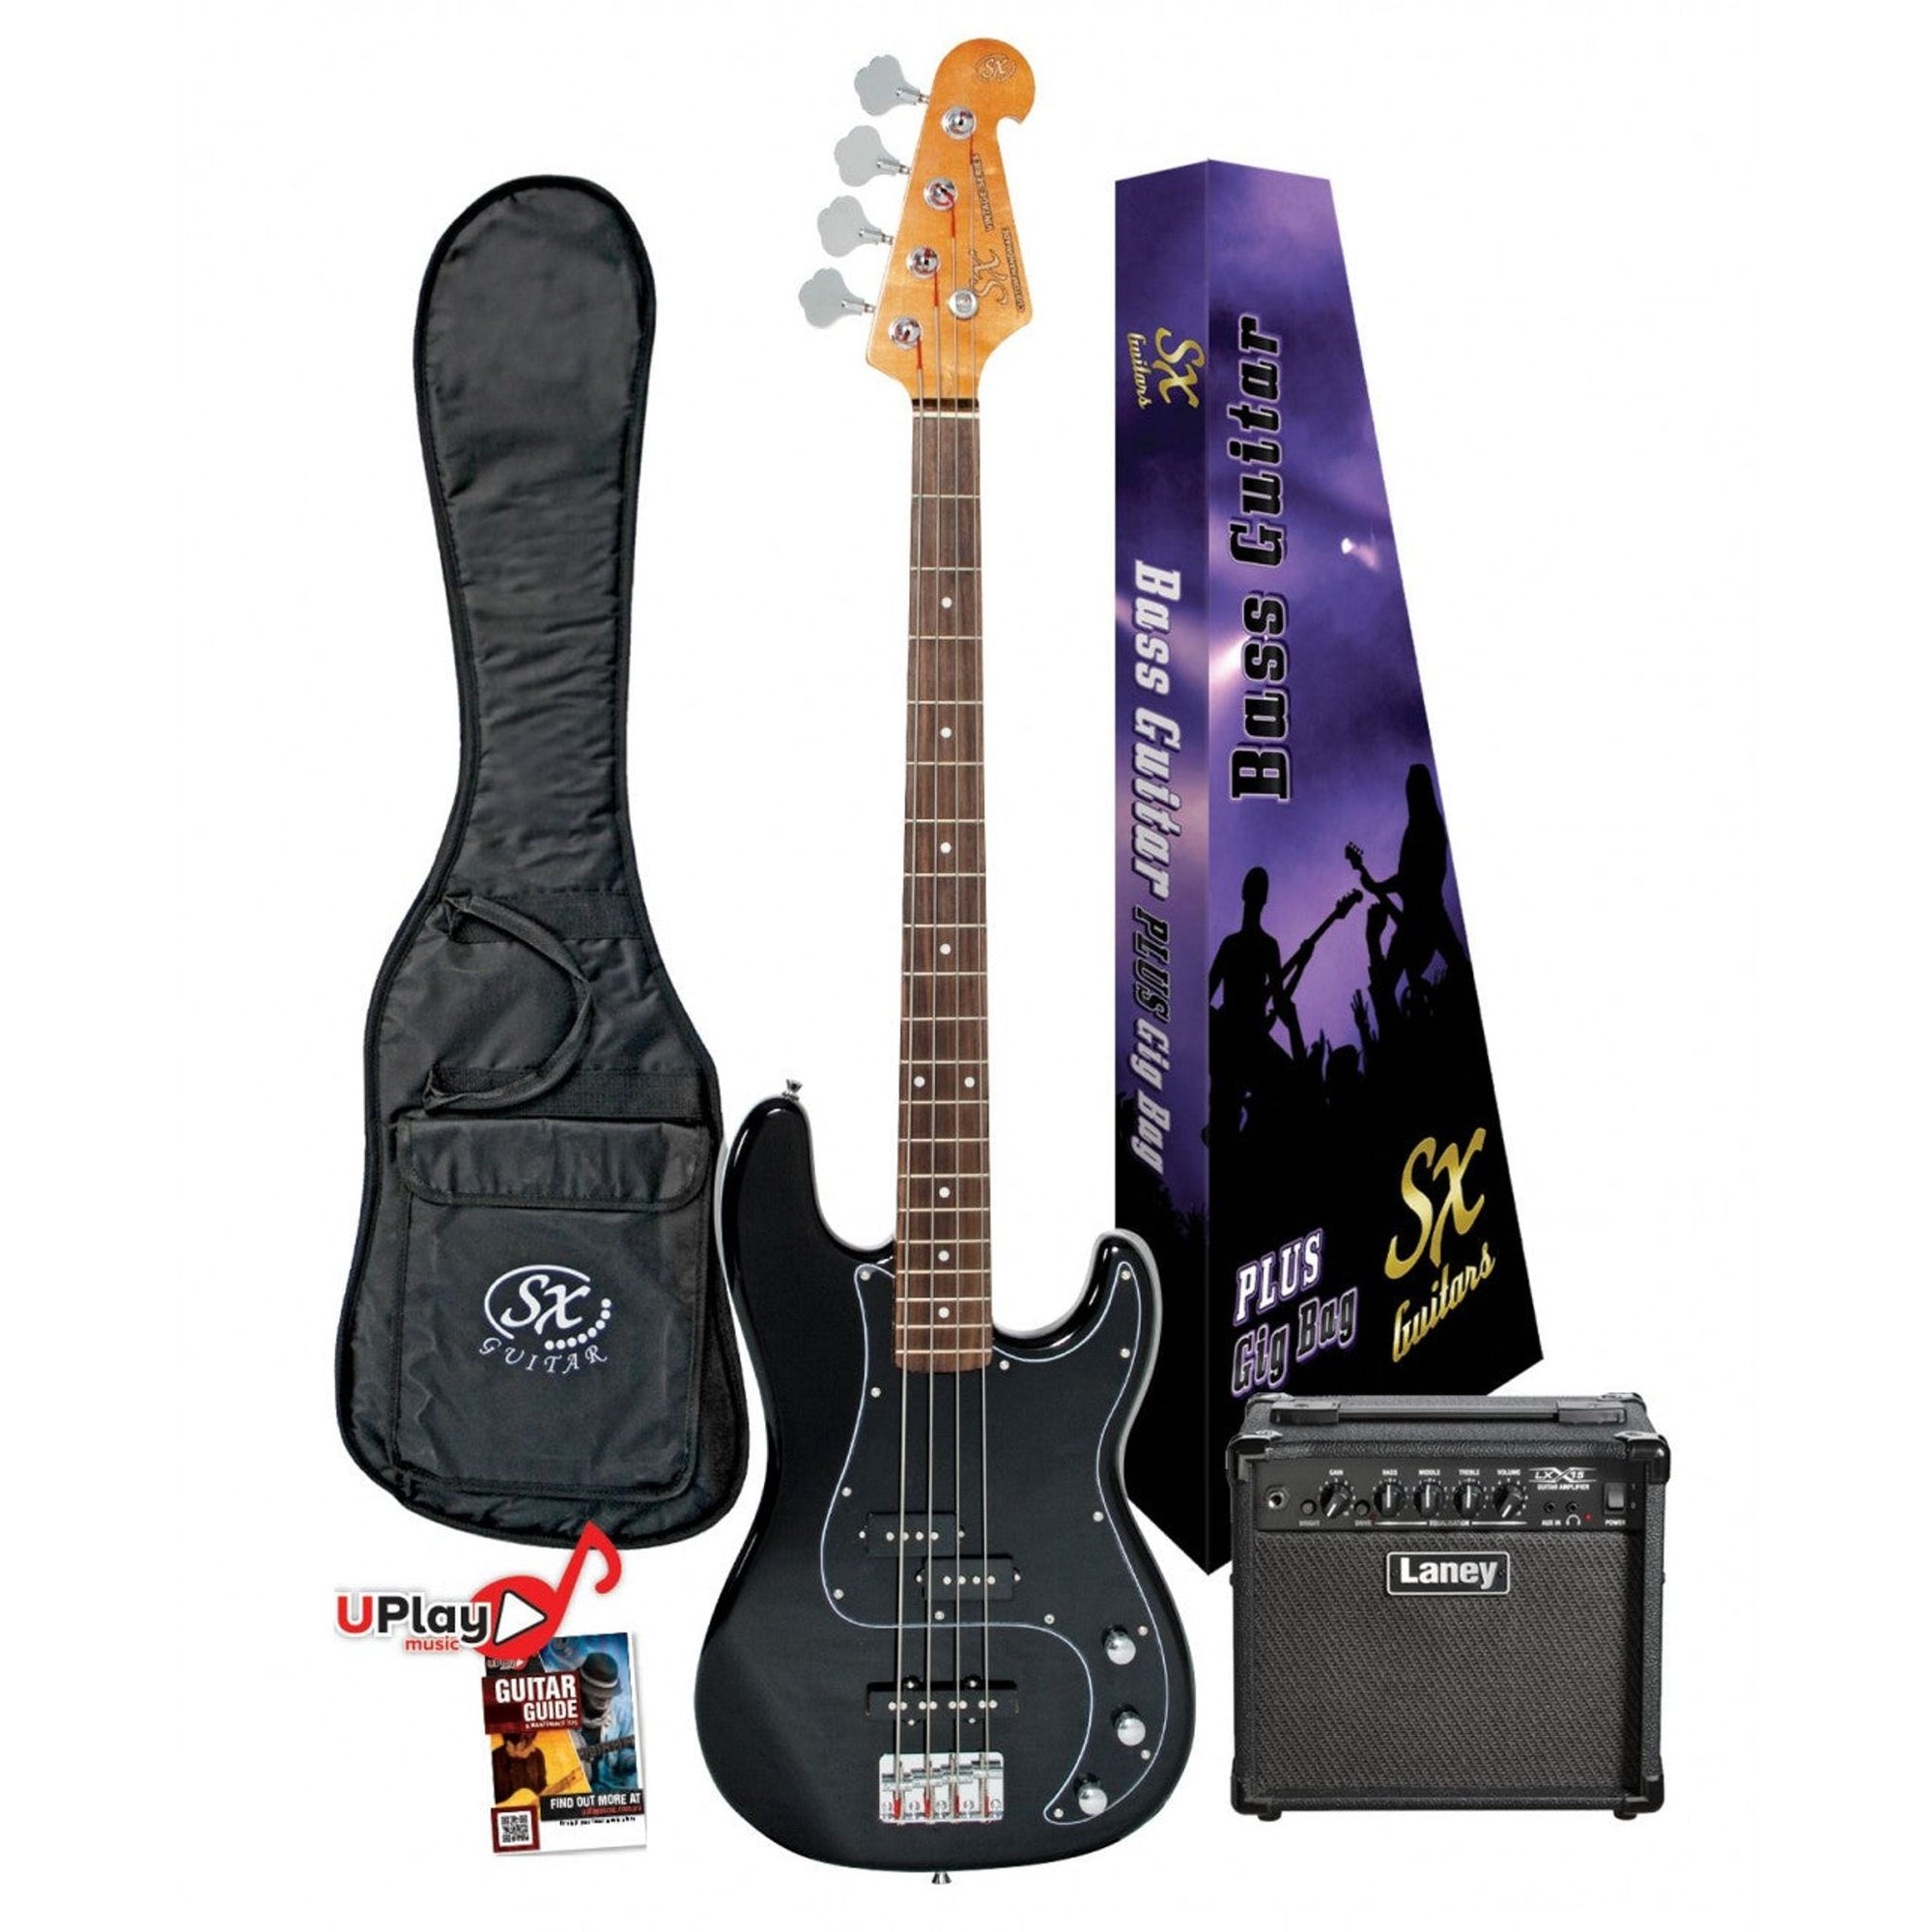 The SX Bass Guitar Pack represents exceptional value for money, build quality, playability and tone. The entire range of SX guitars are perfect for beginners and experienced players looking for a bargain or budget workhorse.